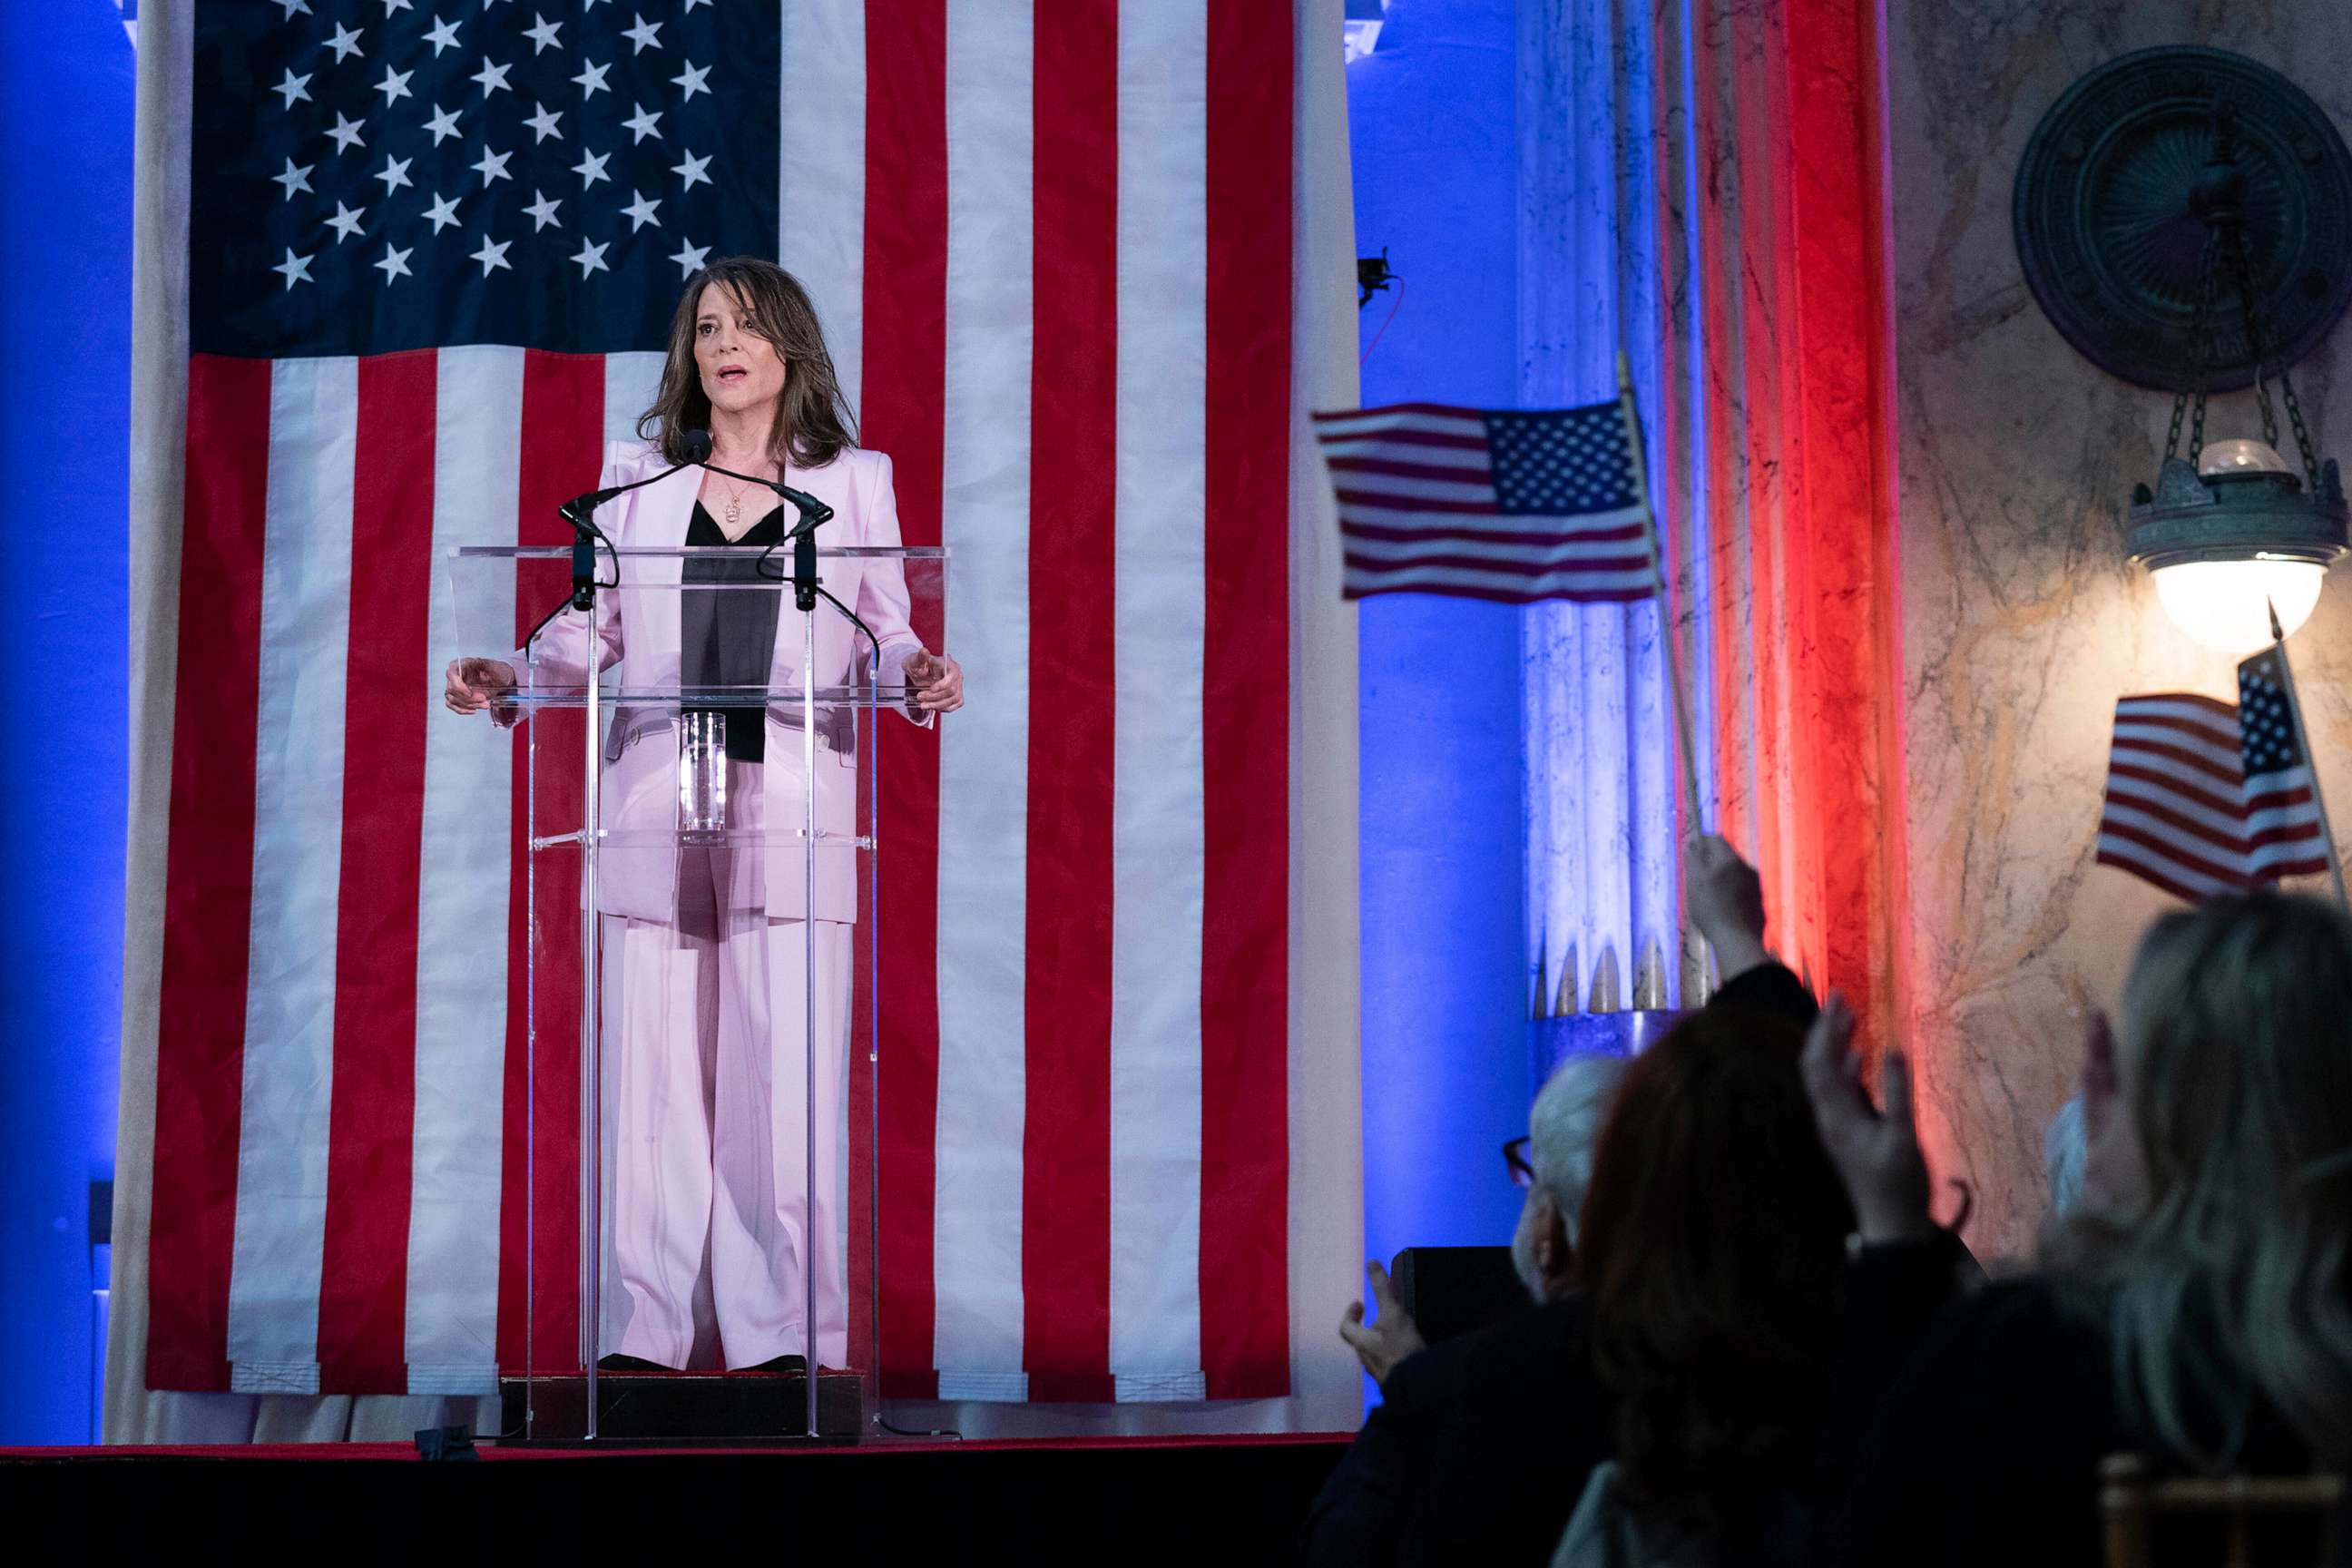 PHOTO: Self-help author Marianne Williamson speaks to the crowd as she launches her 2024 presidential campaign in Washington D.C., March 4, 2023.